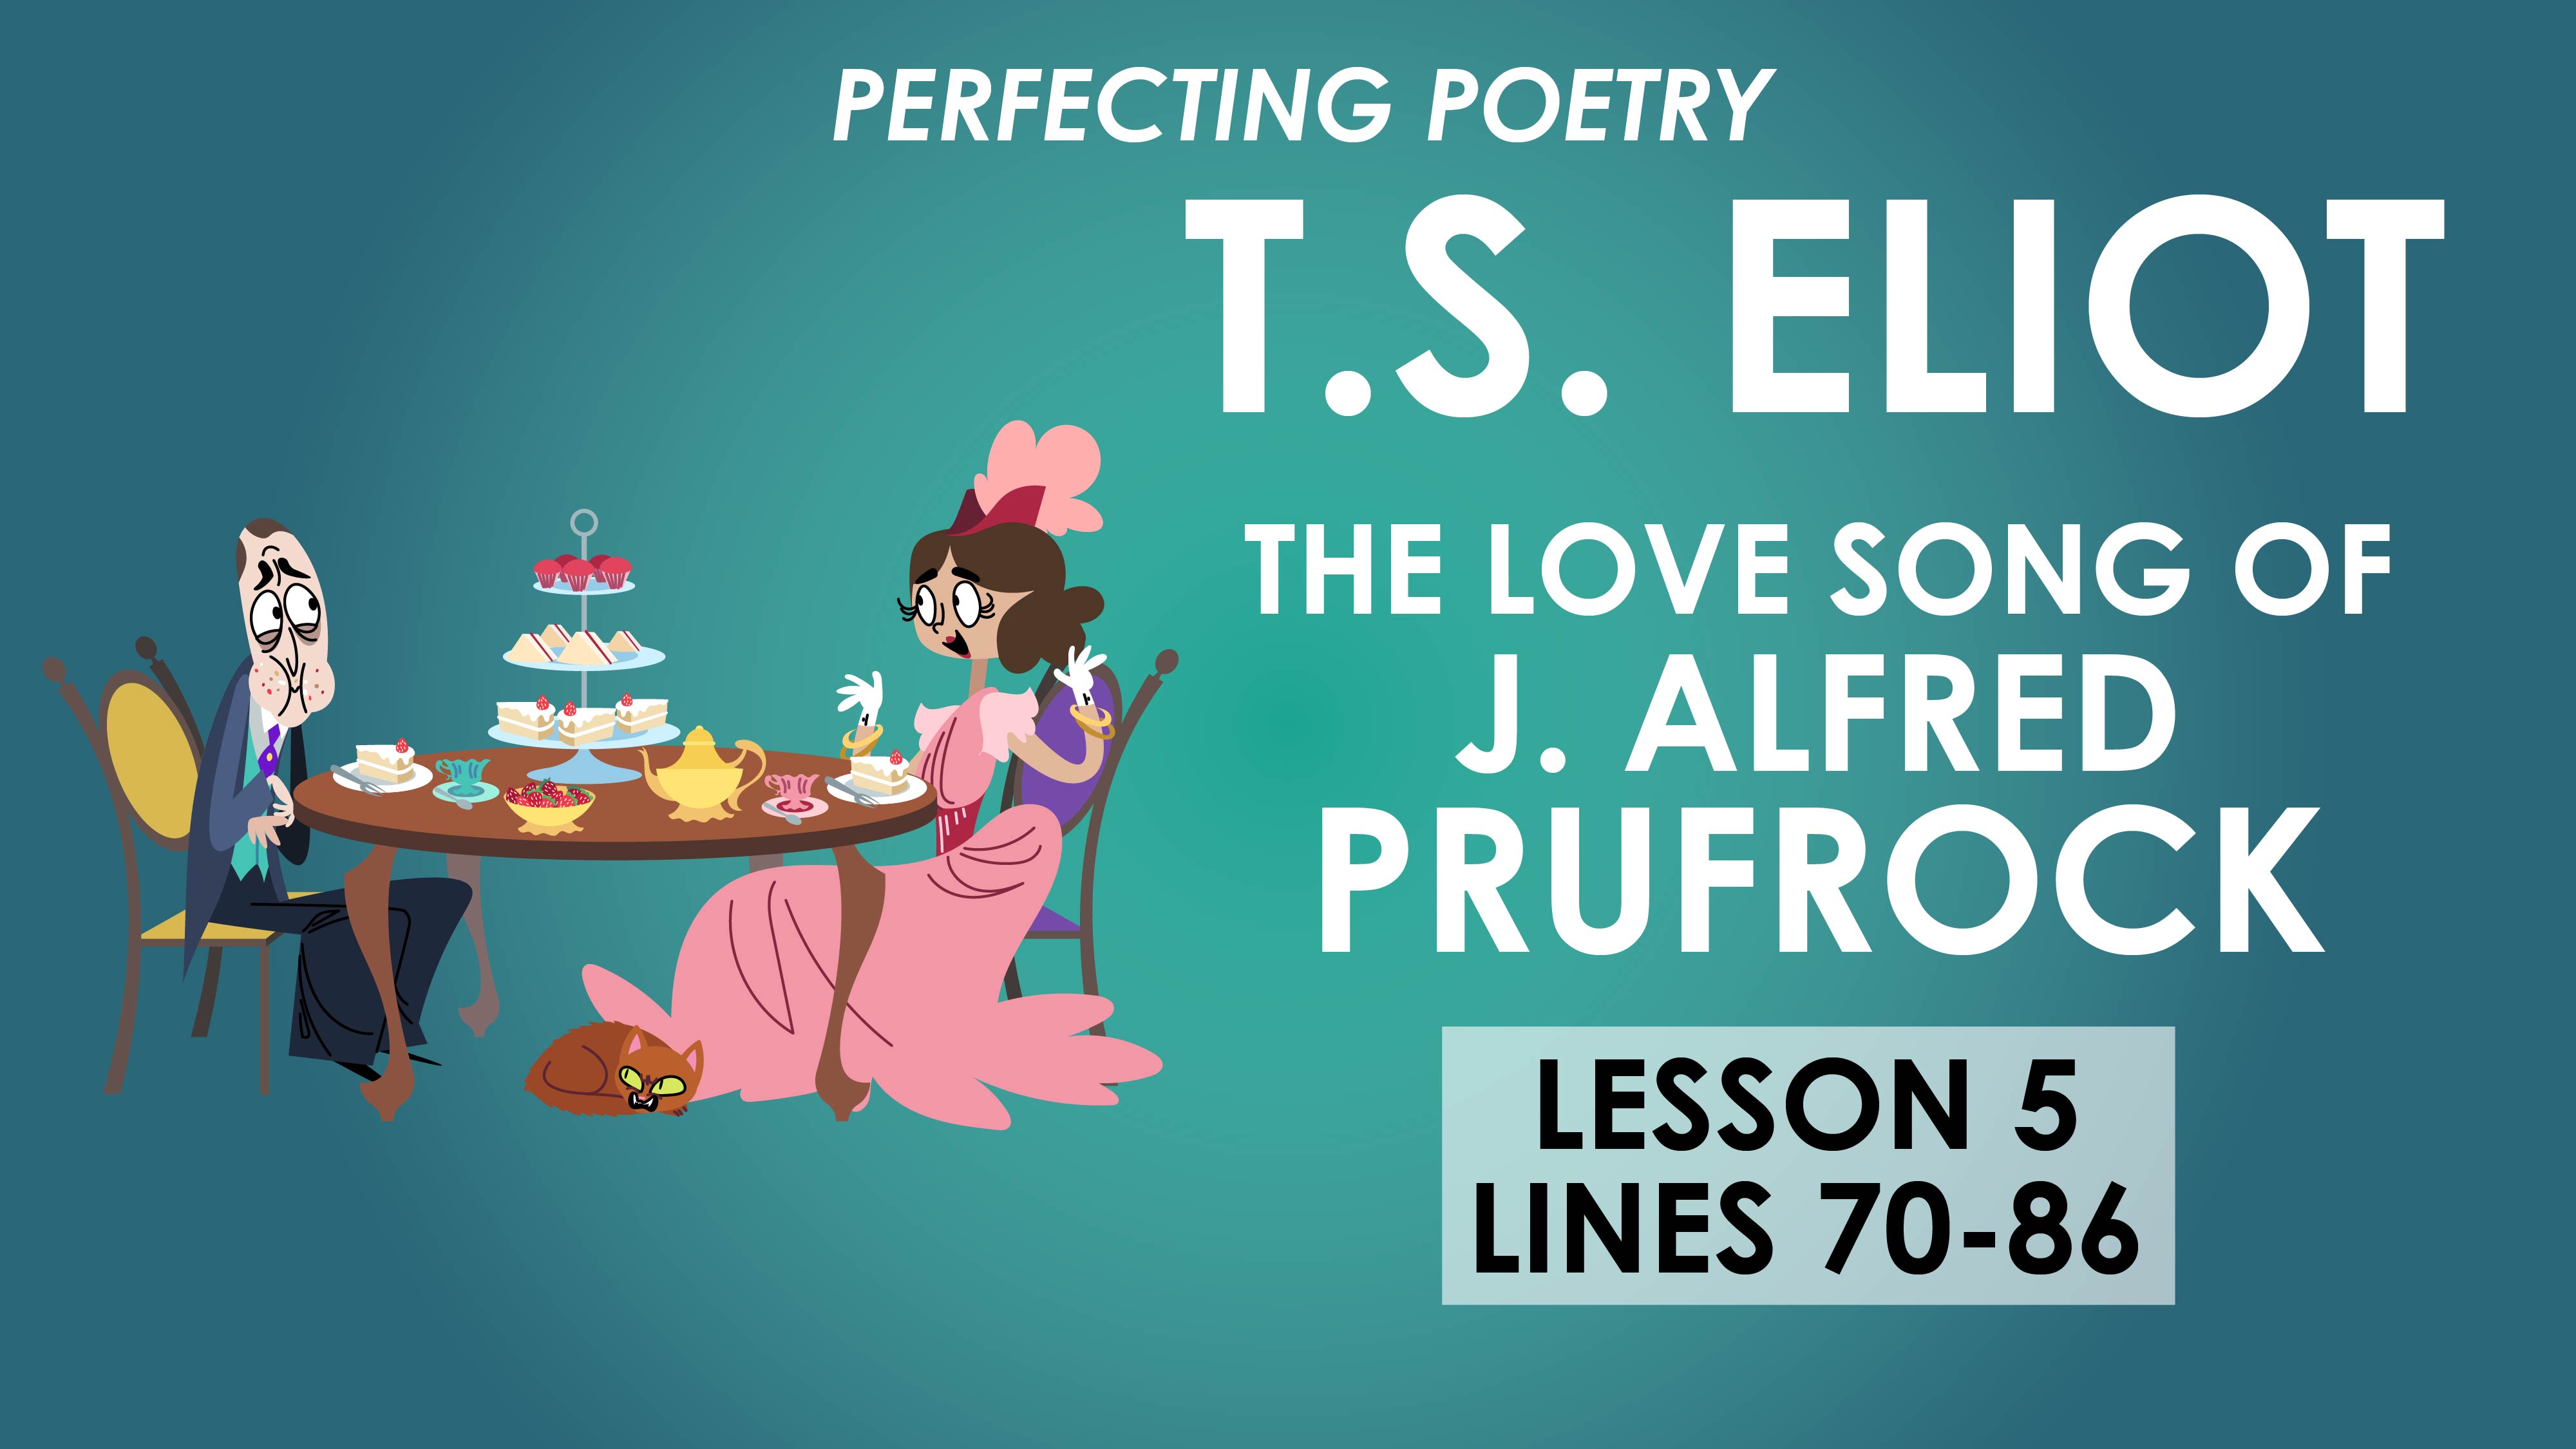 The Love Song of J. Alfred Prufrock - Lesson 5 - T.S. Eliot - Perfecting Poetry